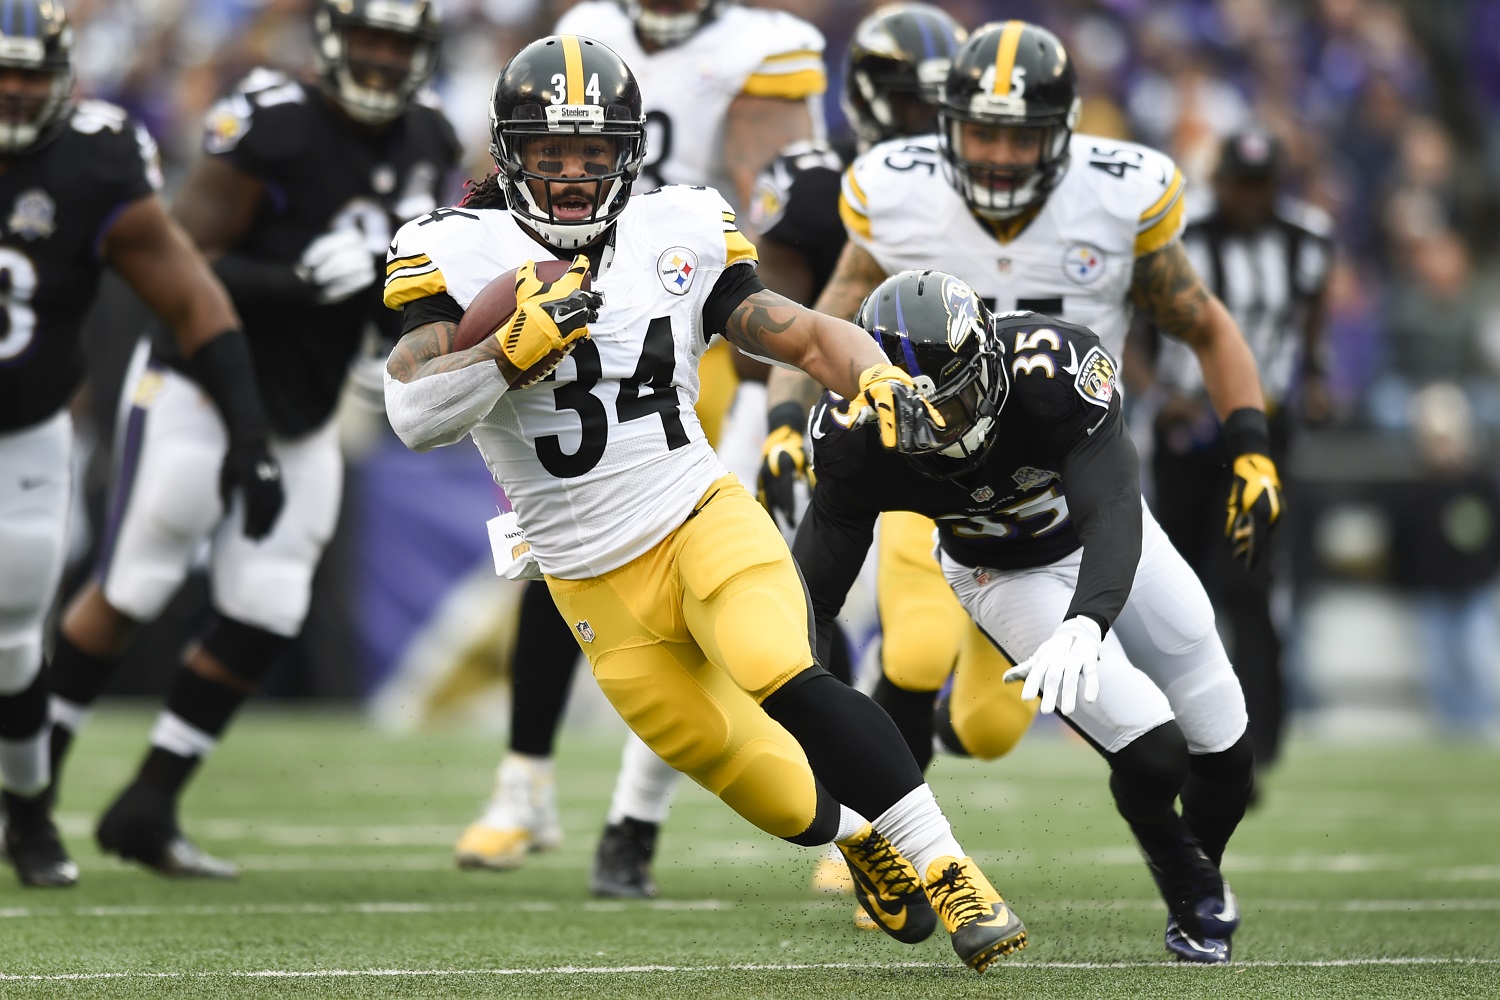 Pittsburgh Steelers running back DeAngelo Williams (34) out runs Baltimore Ravens defensive back Shareece Wright (35) during the first half of an NFL football game in Baltimore, Sunday, Dec. 27, 2015. (AP Photo/Gail Burton)